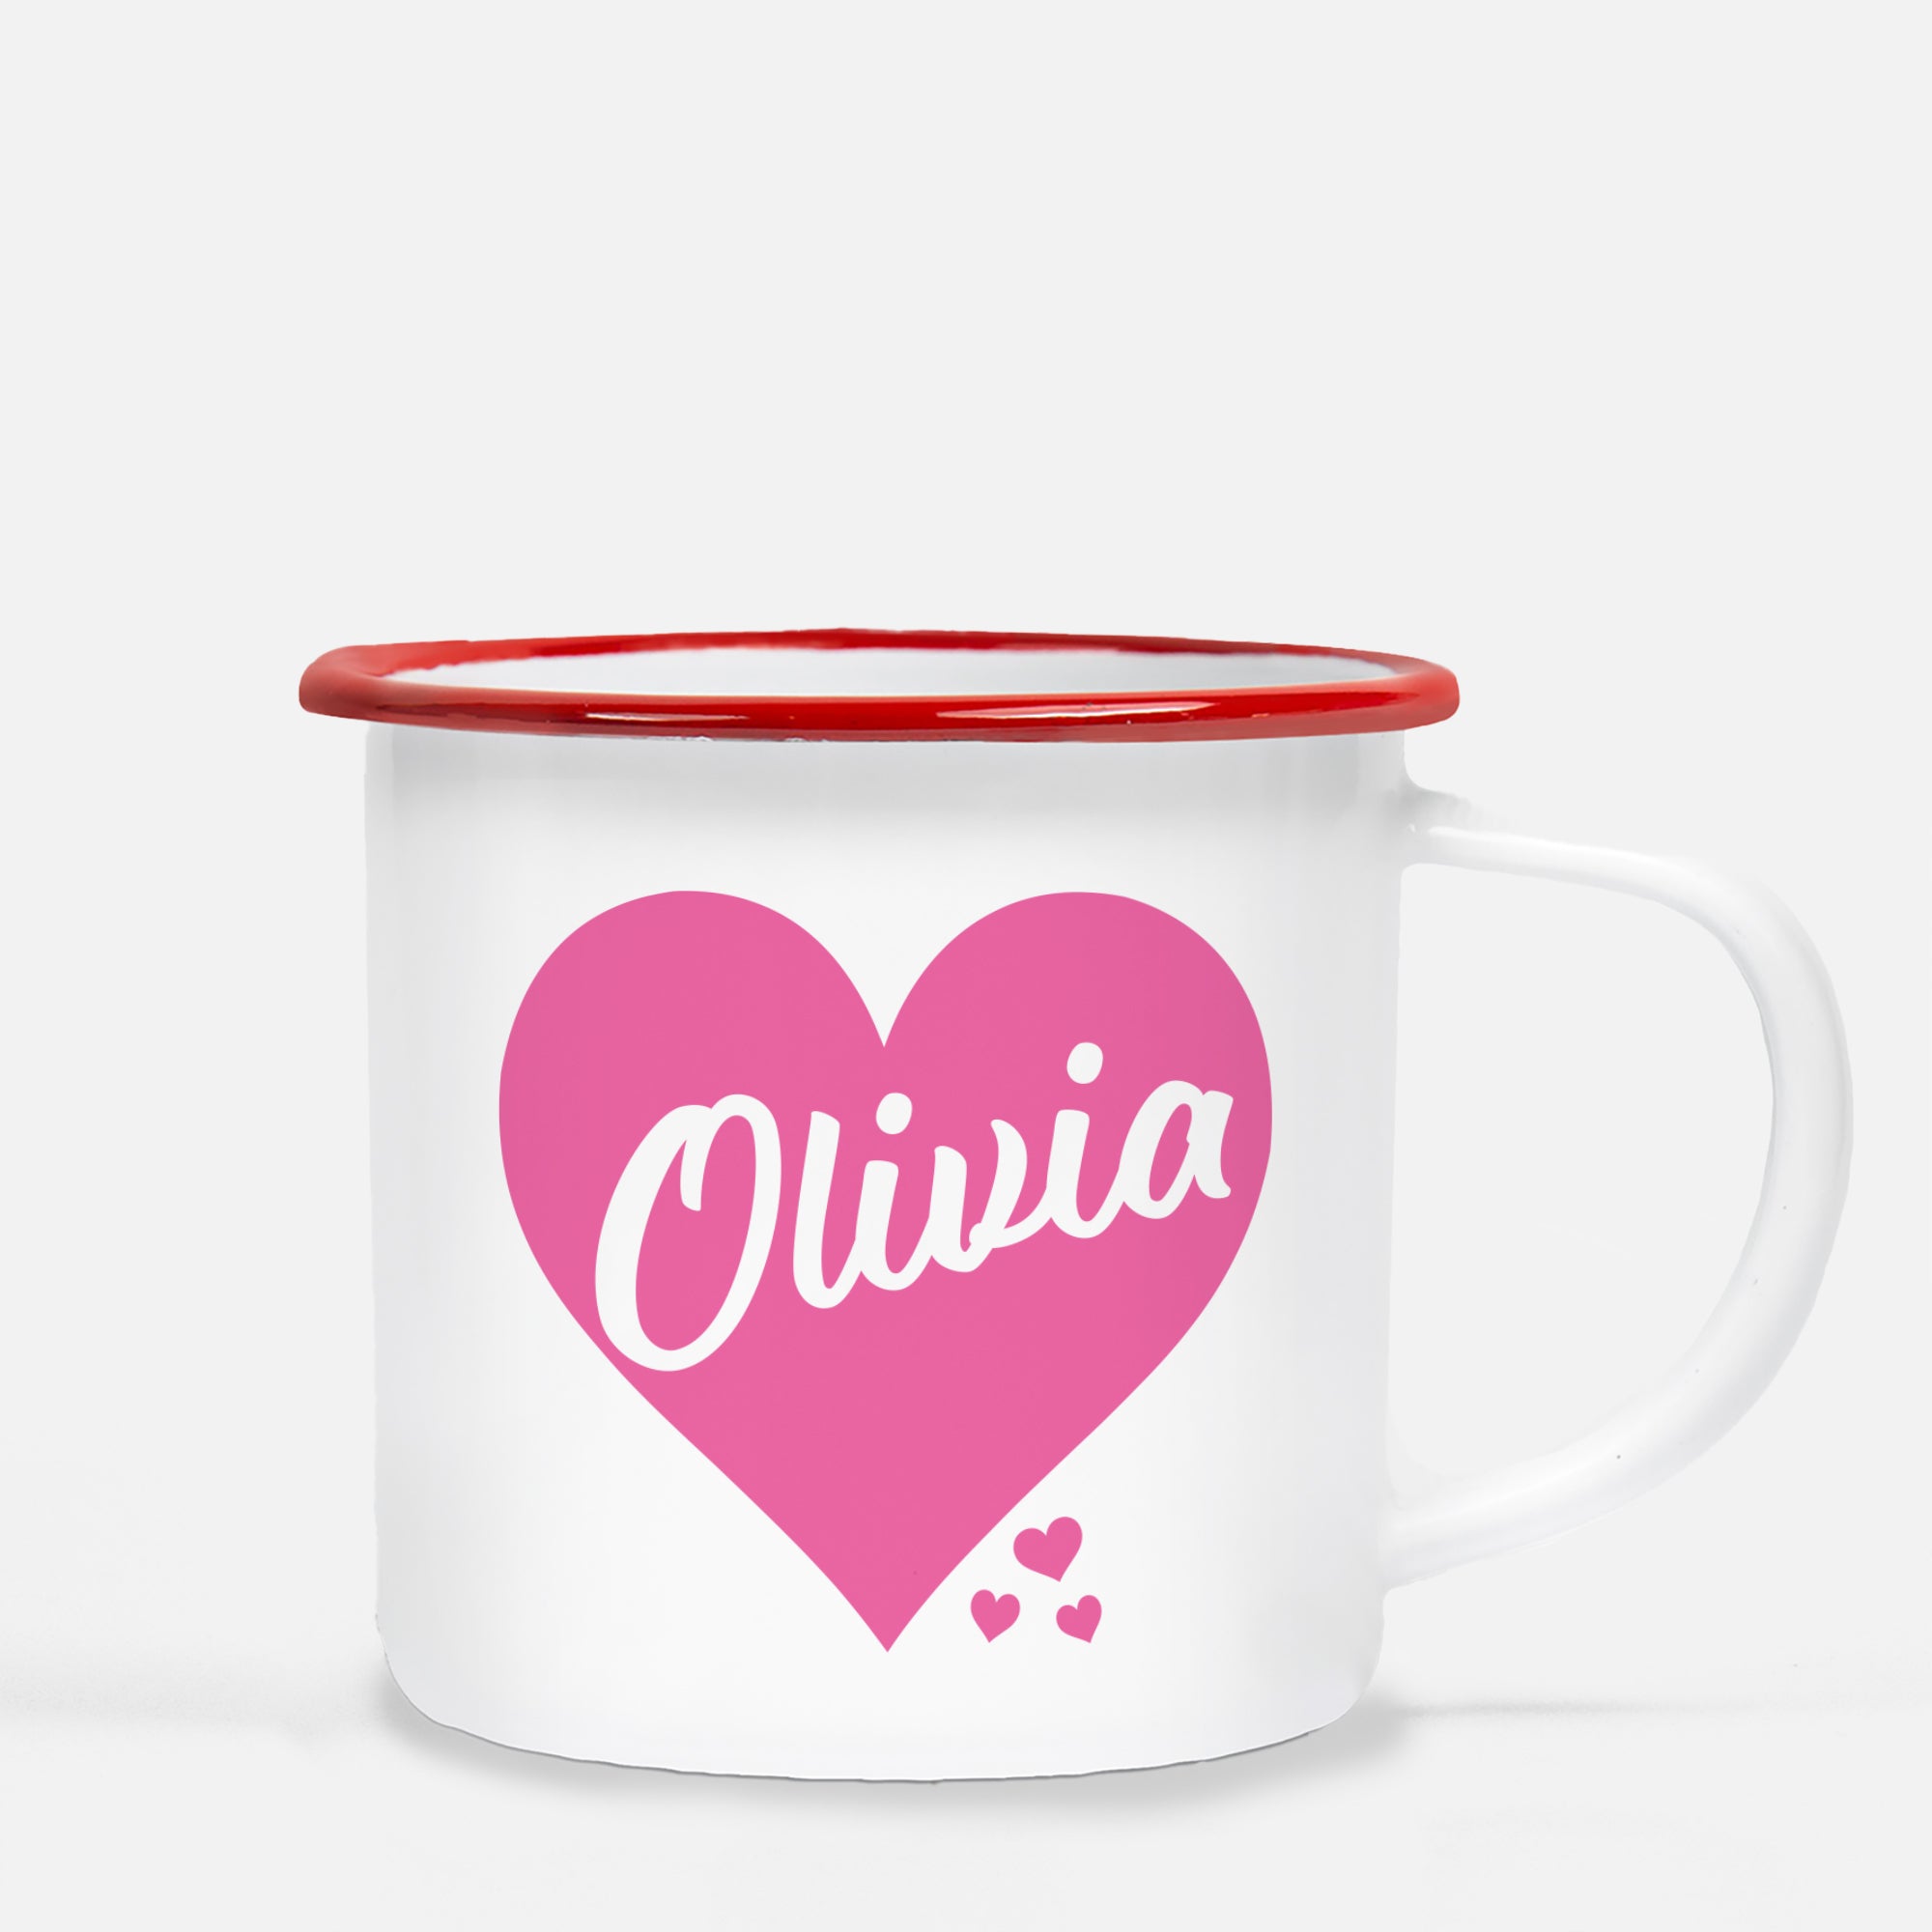 White enamel 12 oz metal camp mug with red lip | Big Pink Heart with name printed inside the heart | Personalized with child's name | Valentine's Day gift